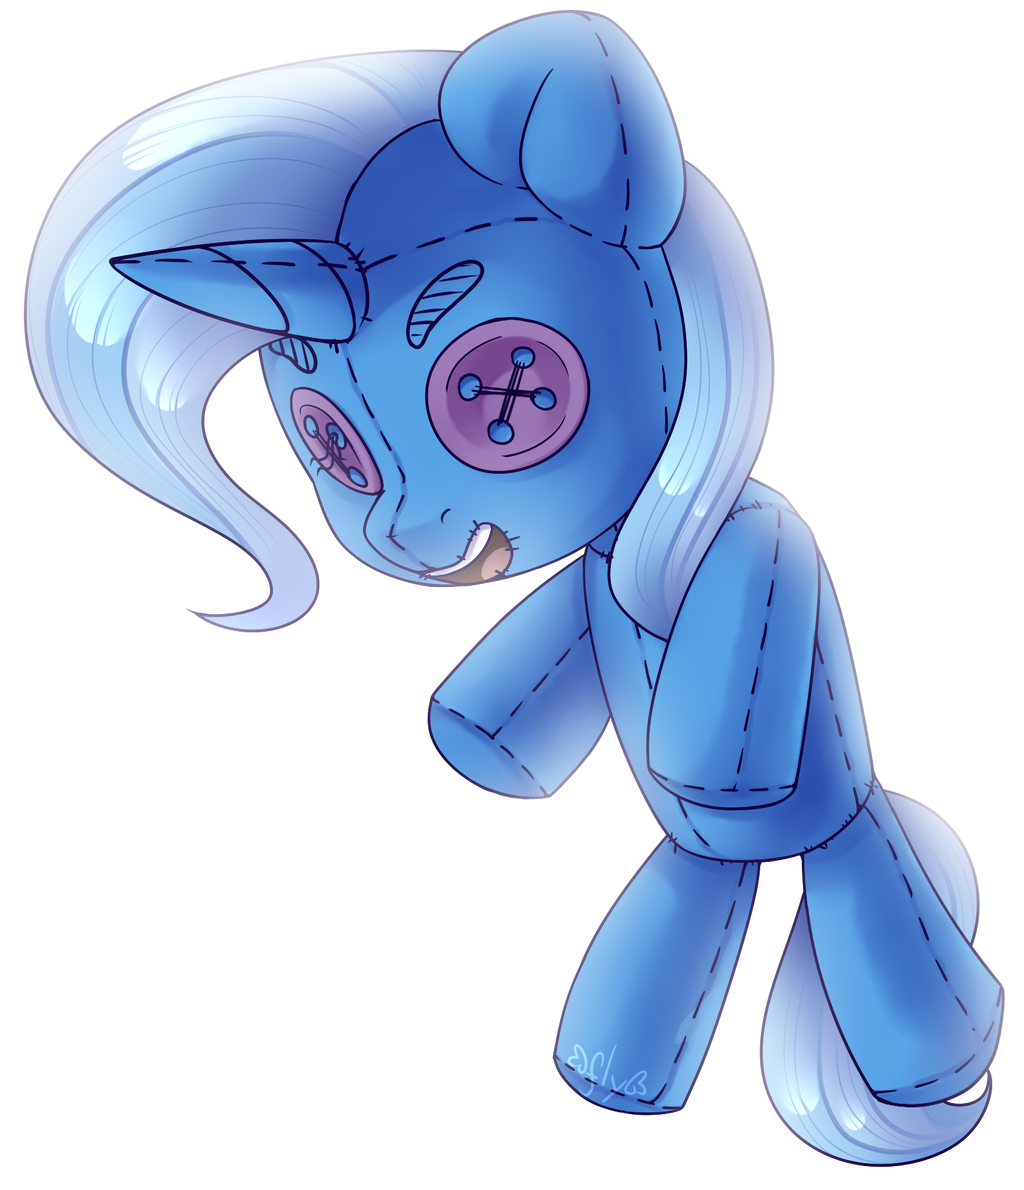 [MLP:FIM] The Great and Plushy Trixie